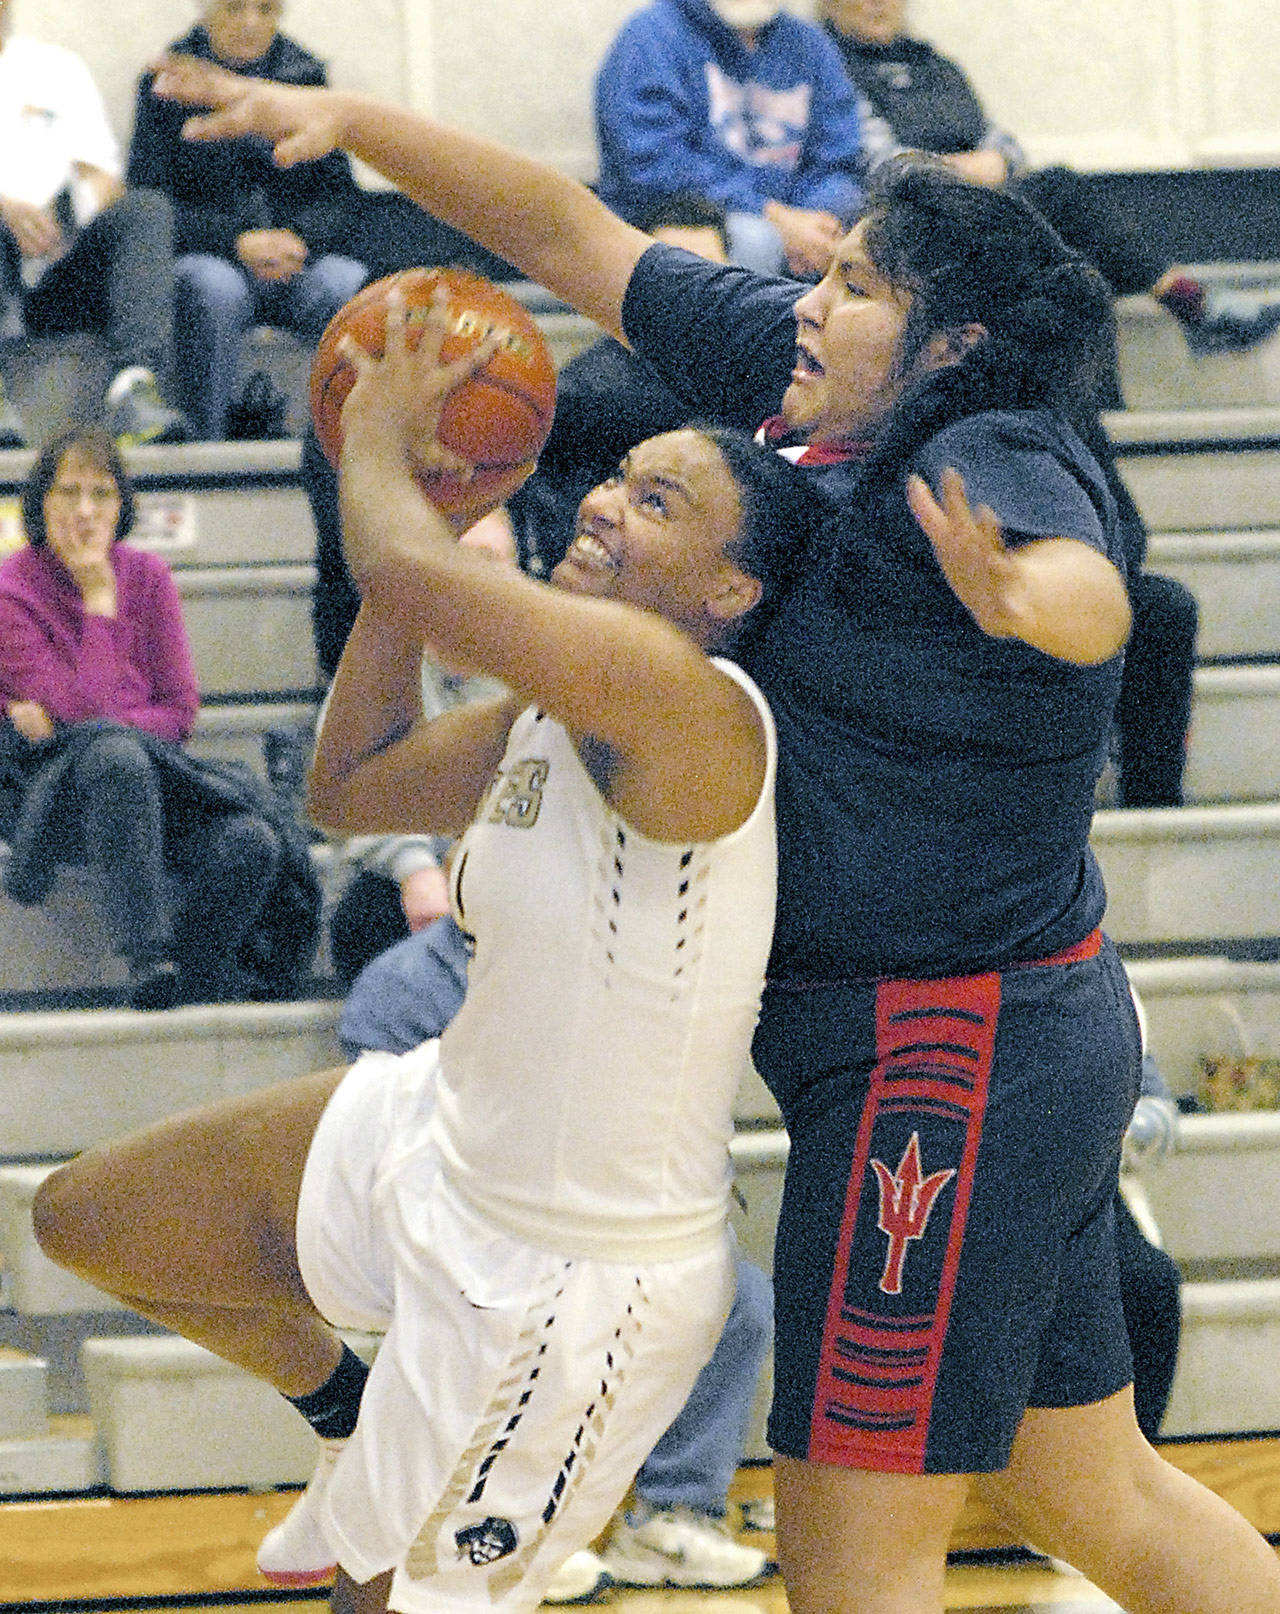 Keith Thorpe/Peninsula Daily News Peninsula’s Jamellia Clark, right, tries to evade the defense of Lower Columbia’s Nizhoni Wheeler, a Port Angeles High School alum, during the second quarter of Friday’s matchup in Port Angeles.